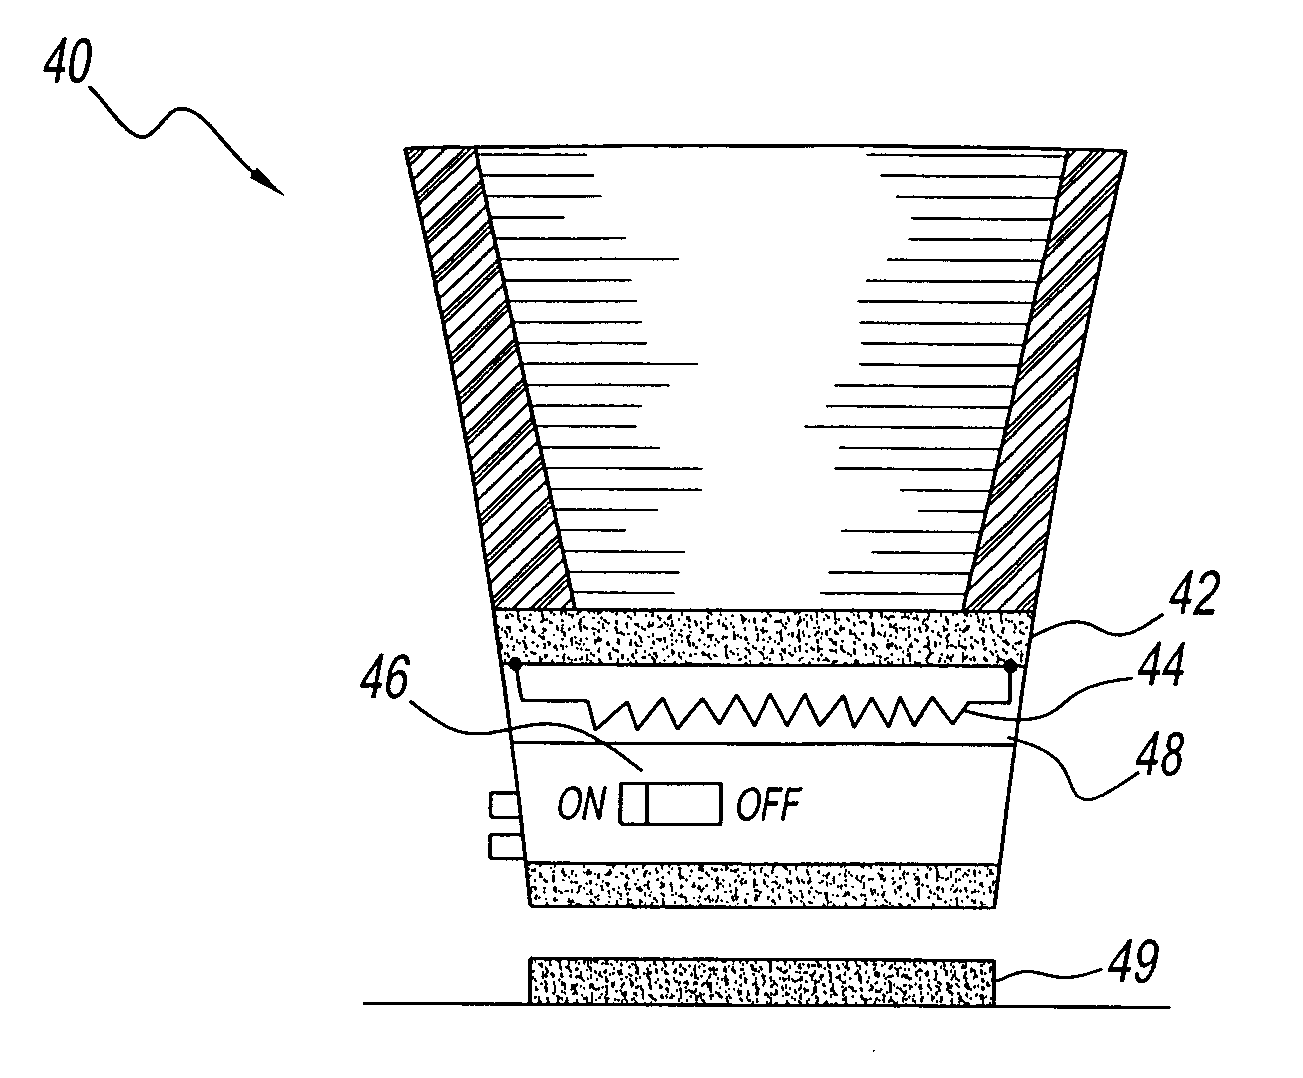 Cup and warming cup holder for a vehicle